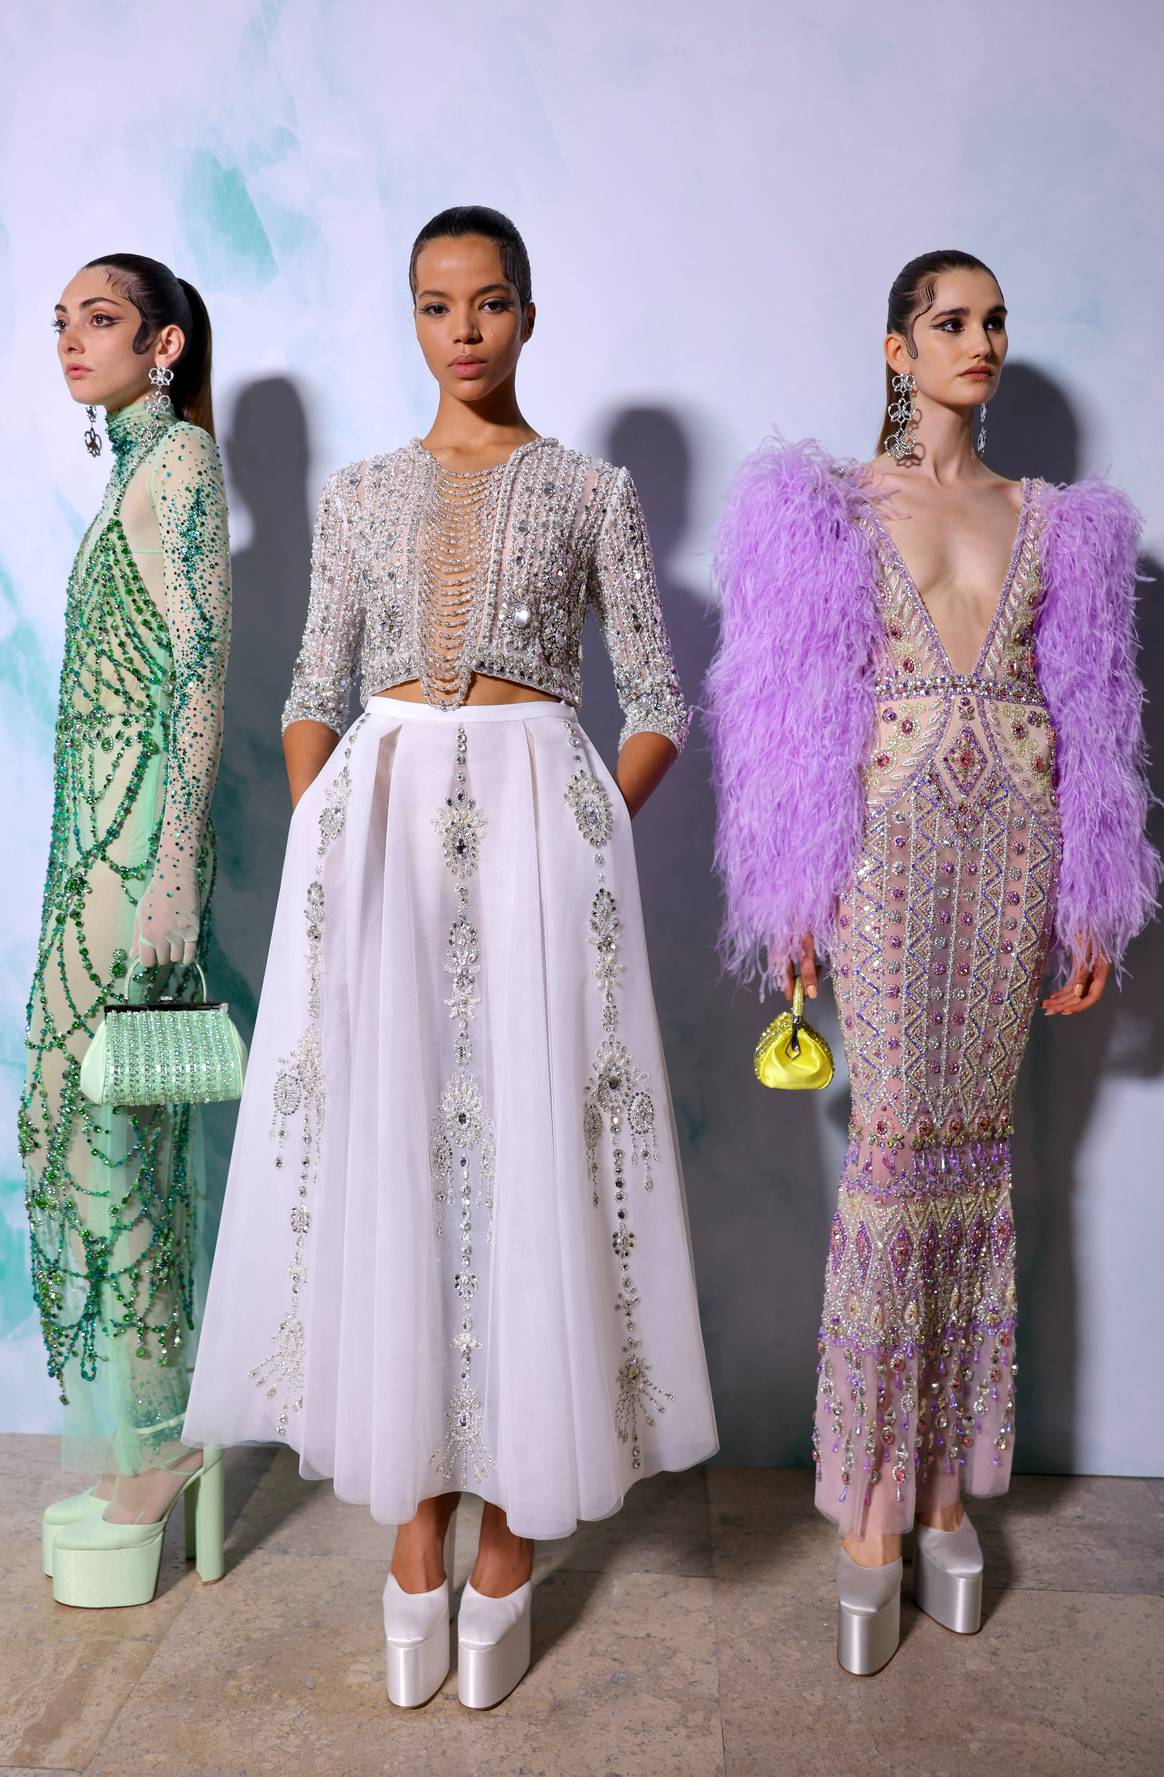 Image: Georges Hobeika; autumn/winter 2022-2023 couture